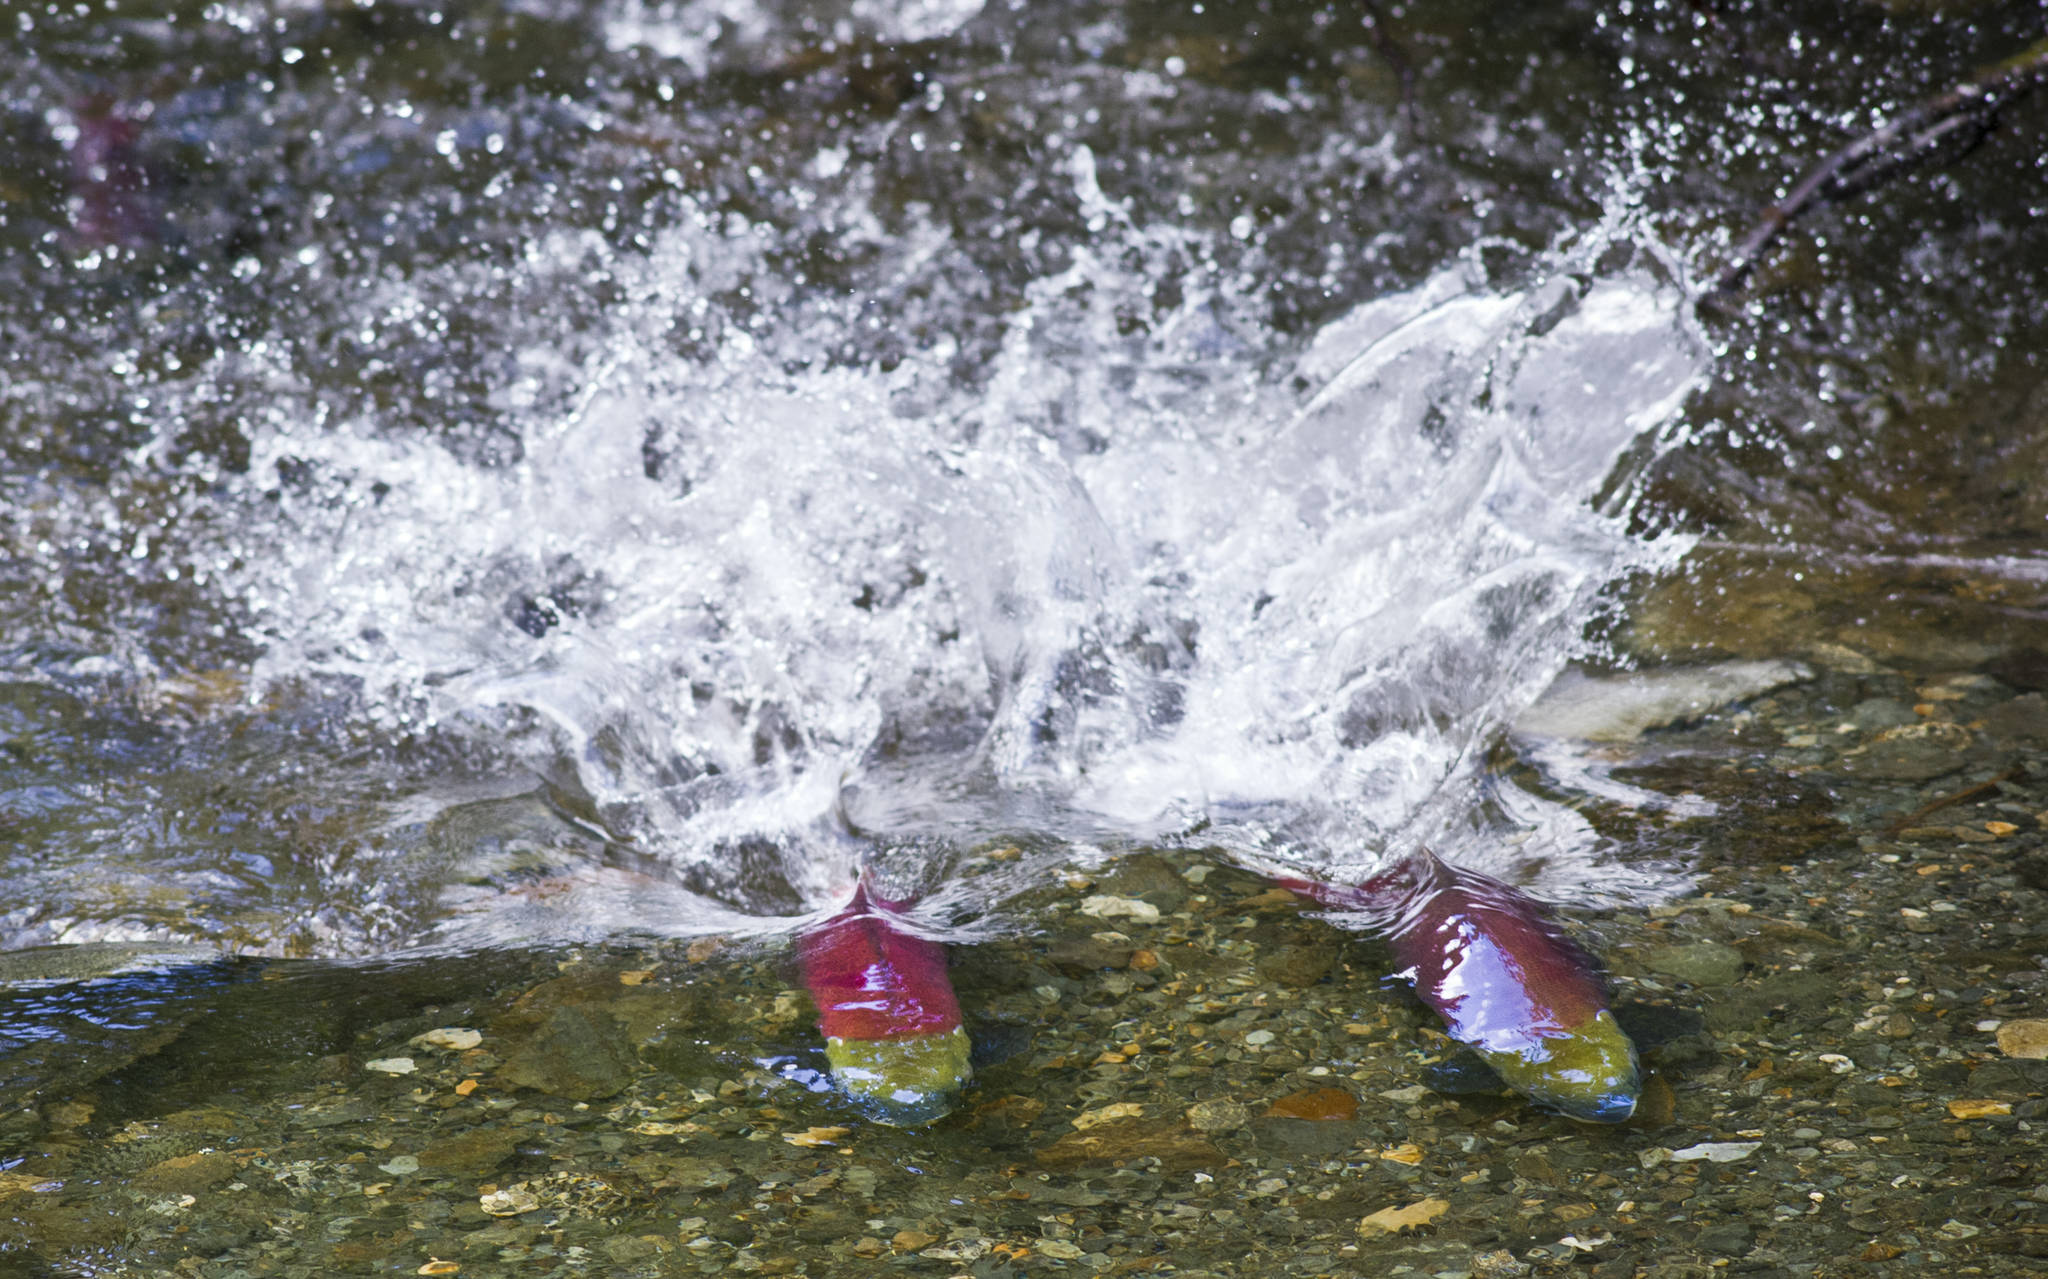 In this August 2015 photo, two male sockeye salmon battle for territory in Steep Creek near the Mendenhall Glacier Visitor Center. (Michael Penn | Juneau Empire File)